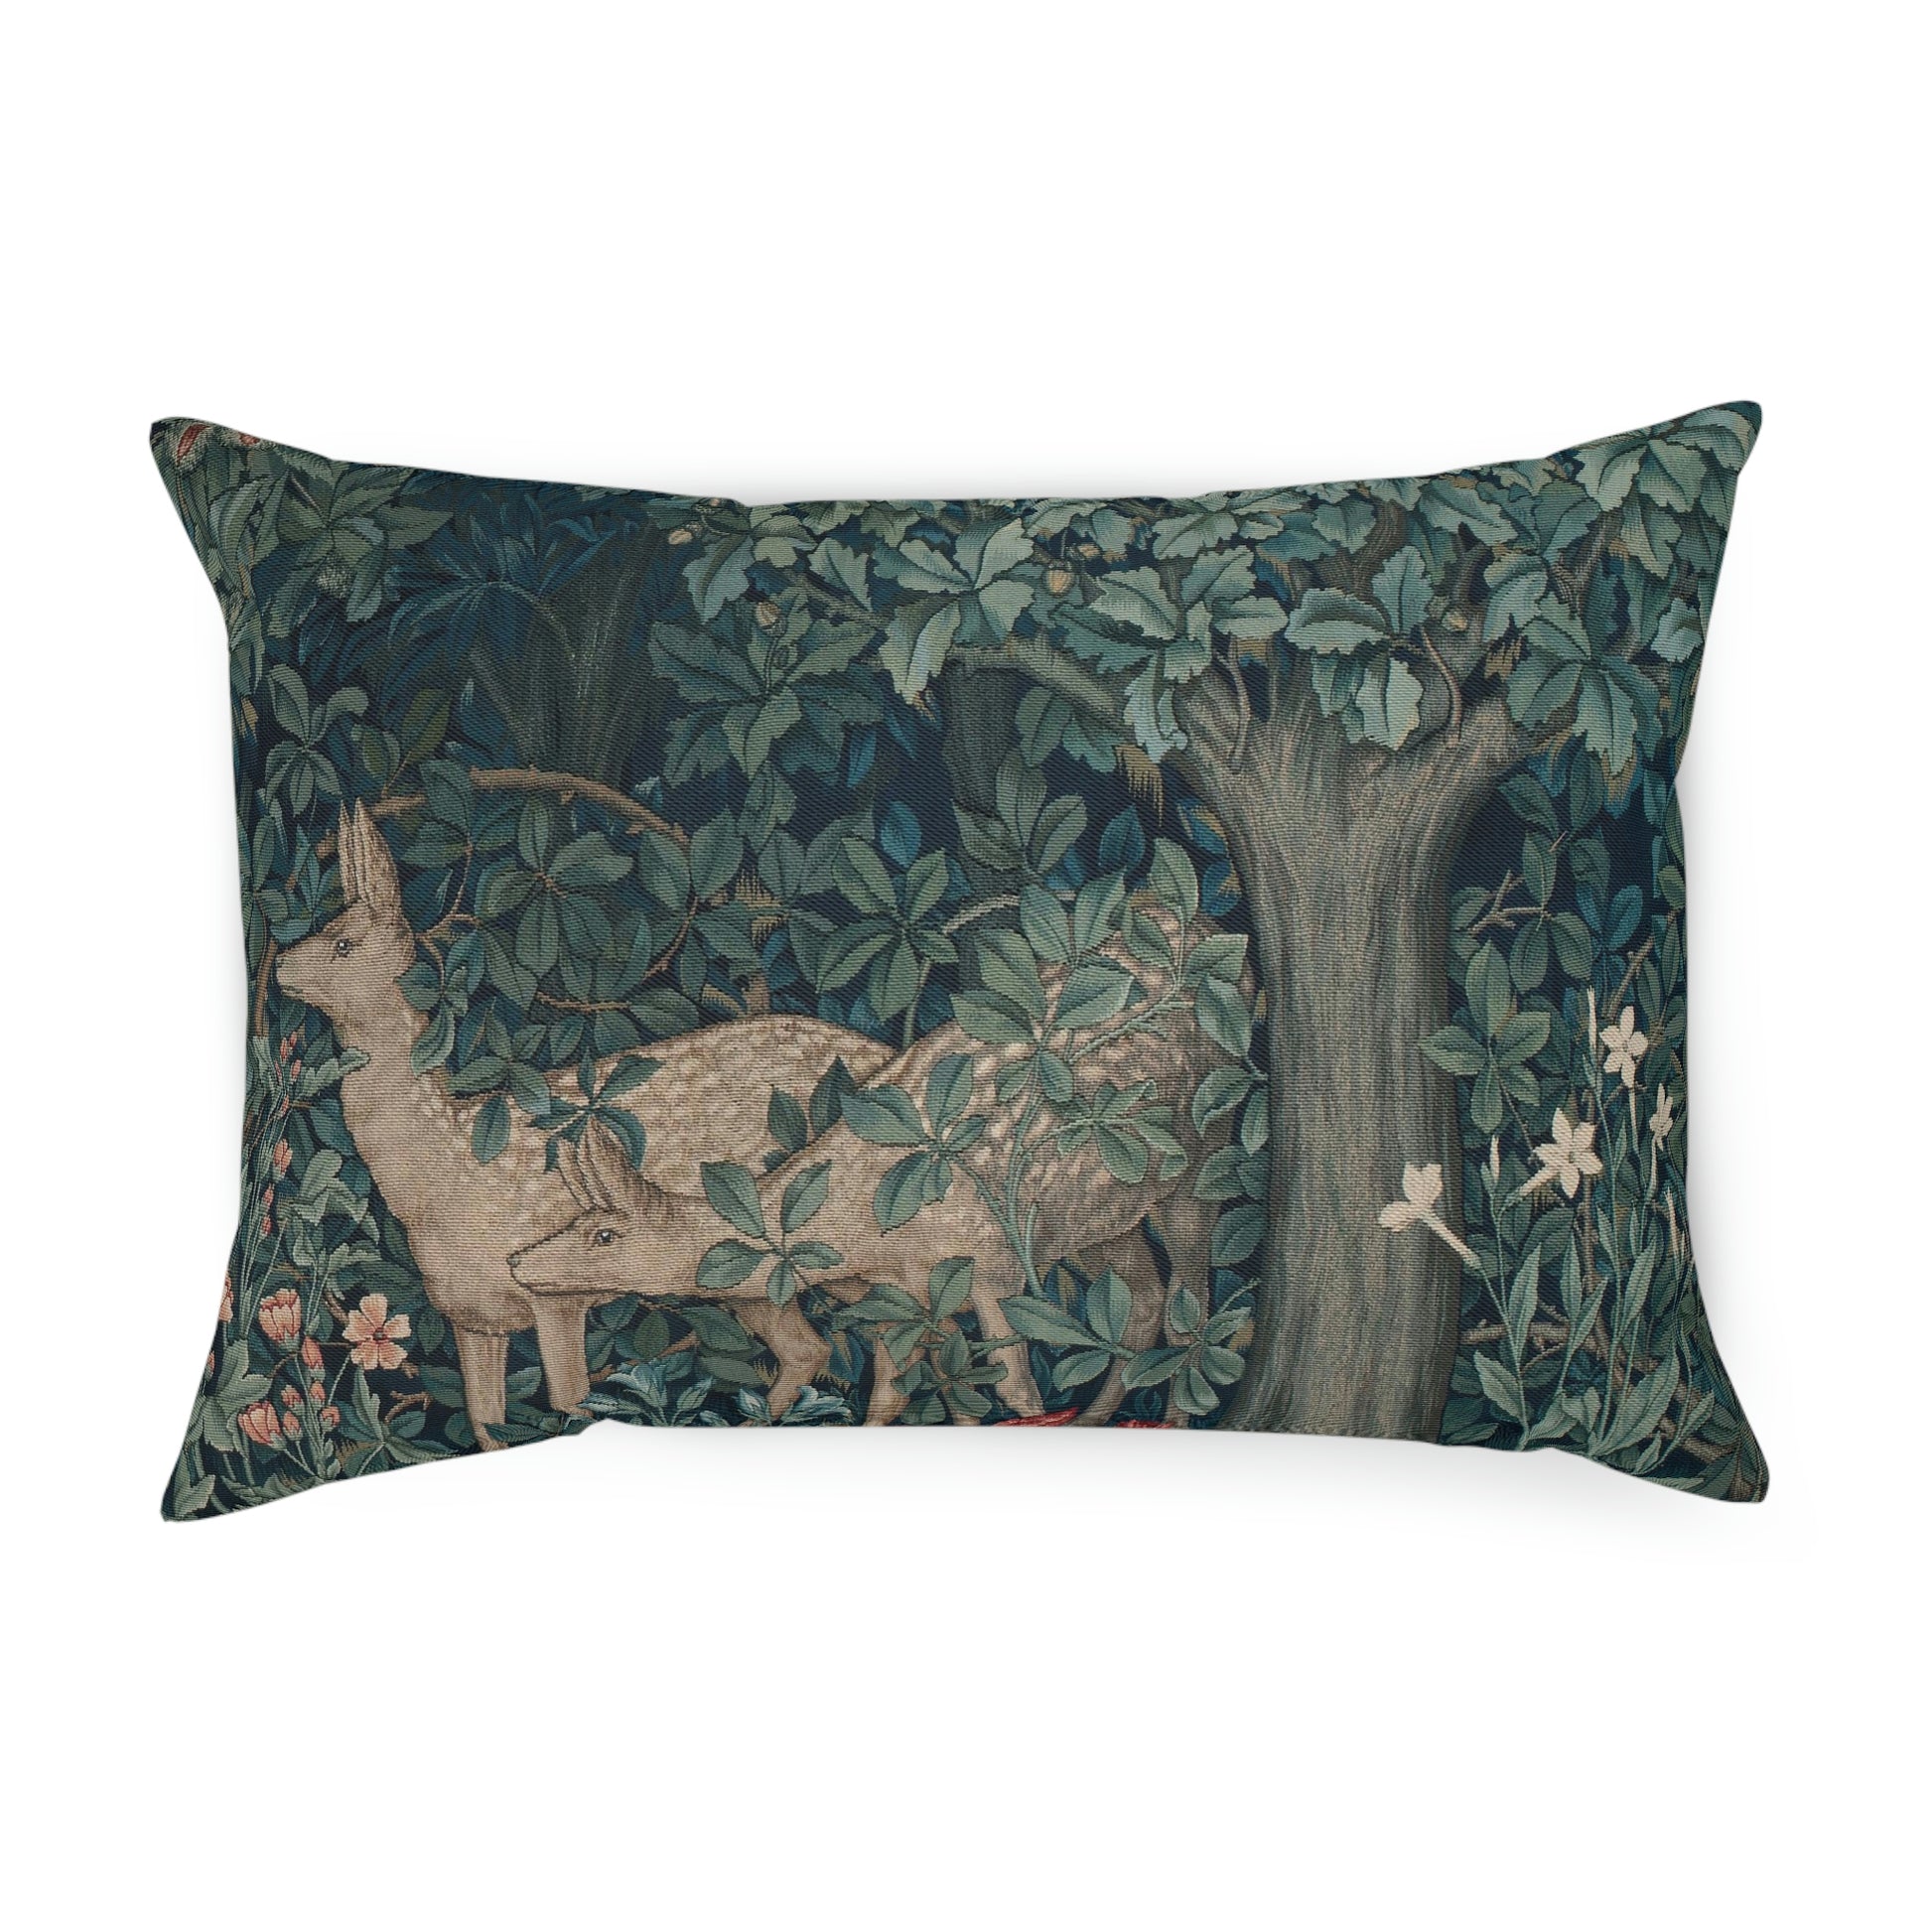 William-Morris-and-Co-Cushion-and-Cushion-Cover-Dear-by-John-Henry-Dearle-Green-Forest-Collection-11